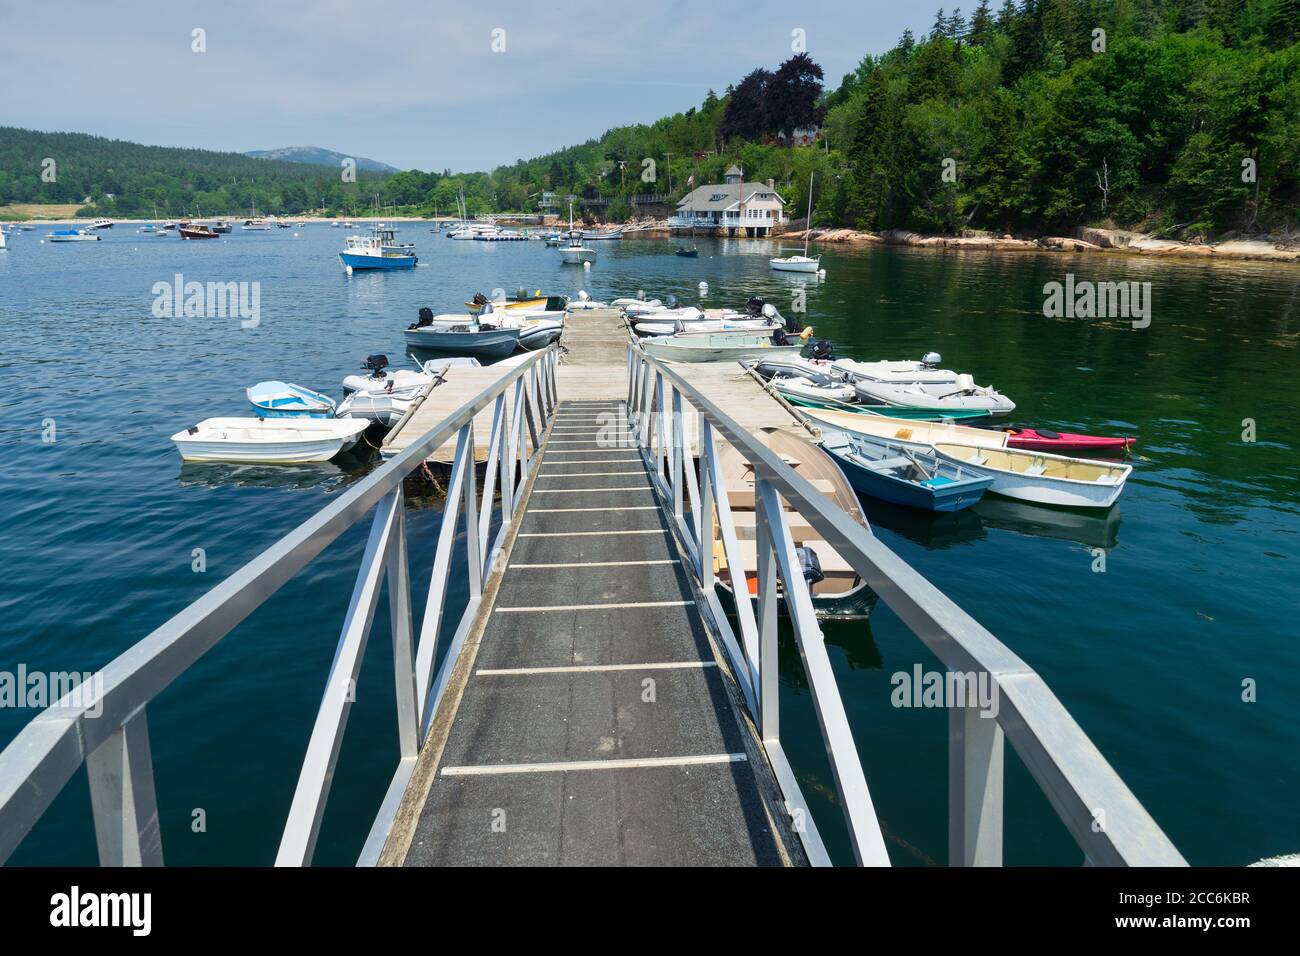 A boat ramp leads to several small boats in Seal Harbor, Maine. Stock Photo